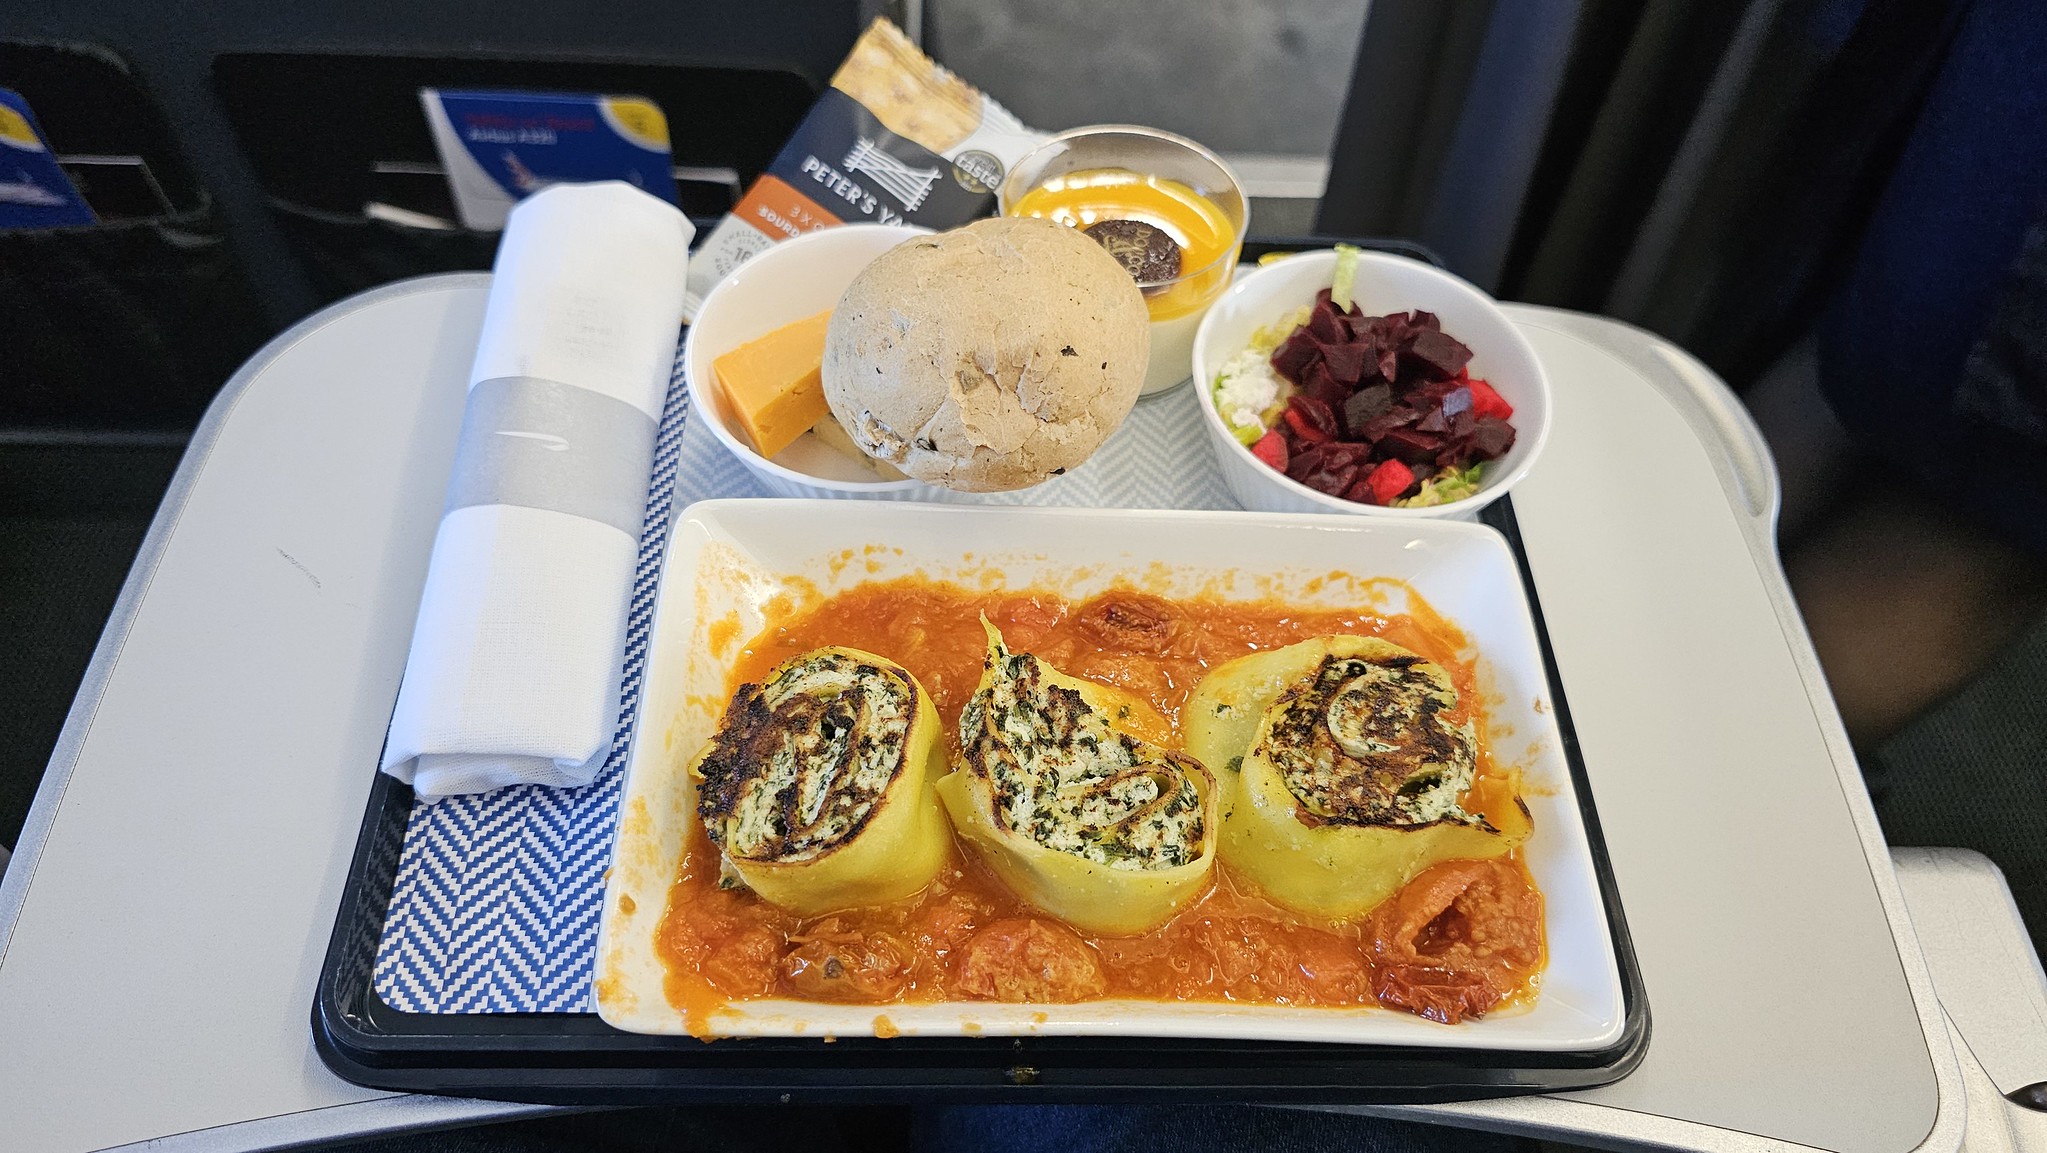 The pasta dish served on board the BA flight to Sofia